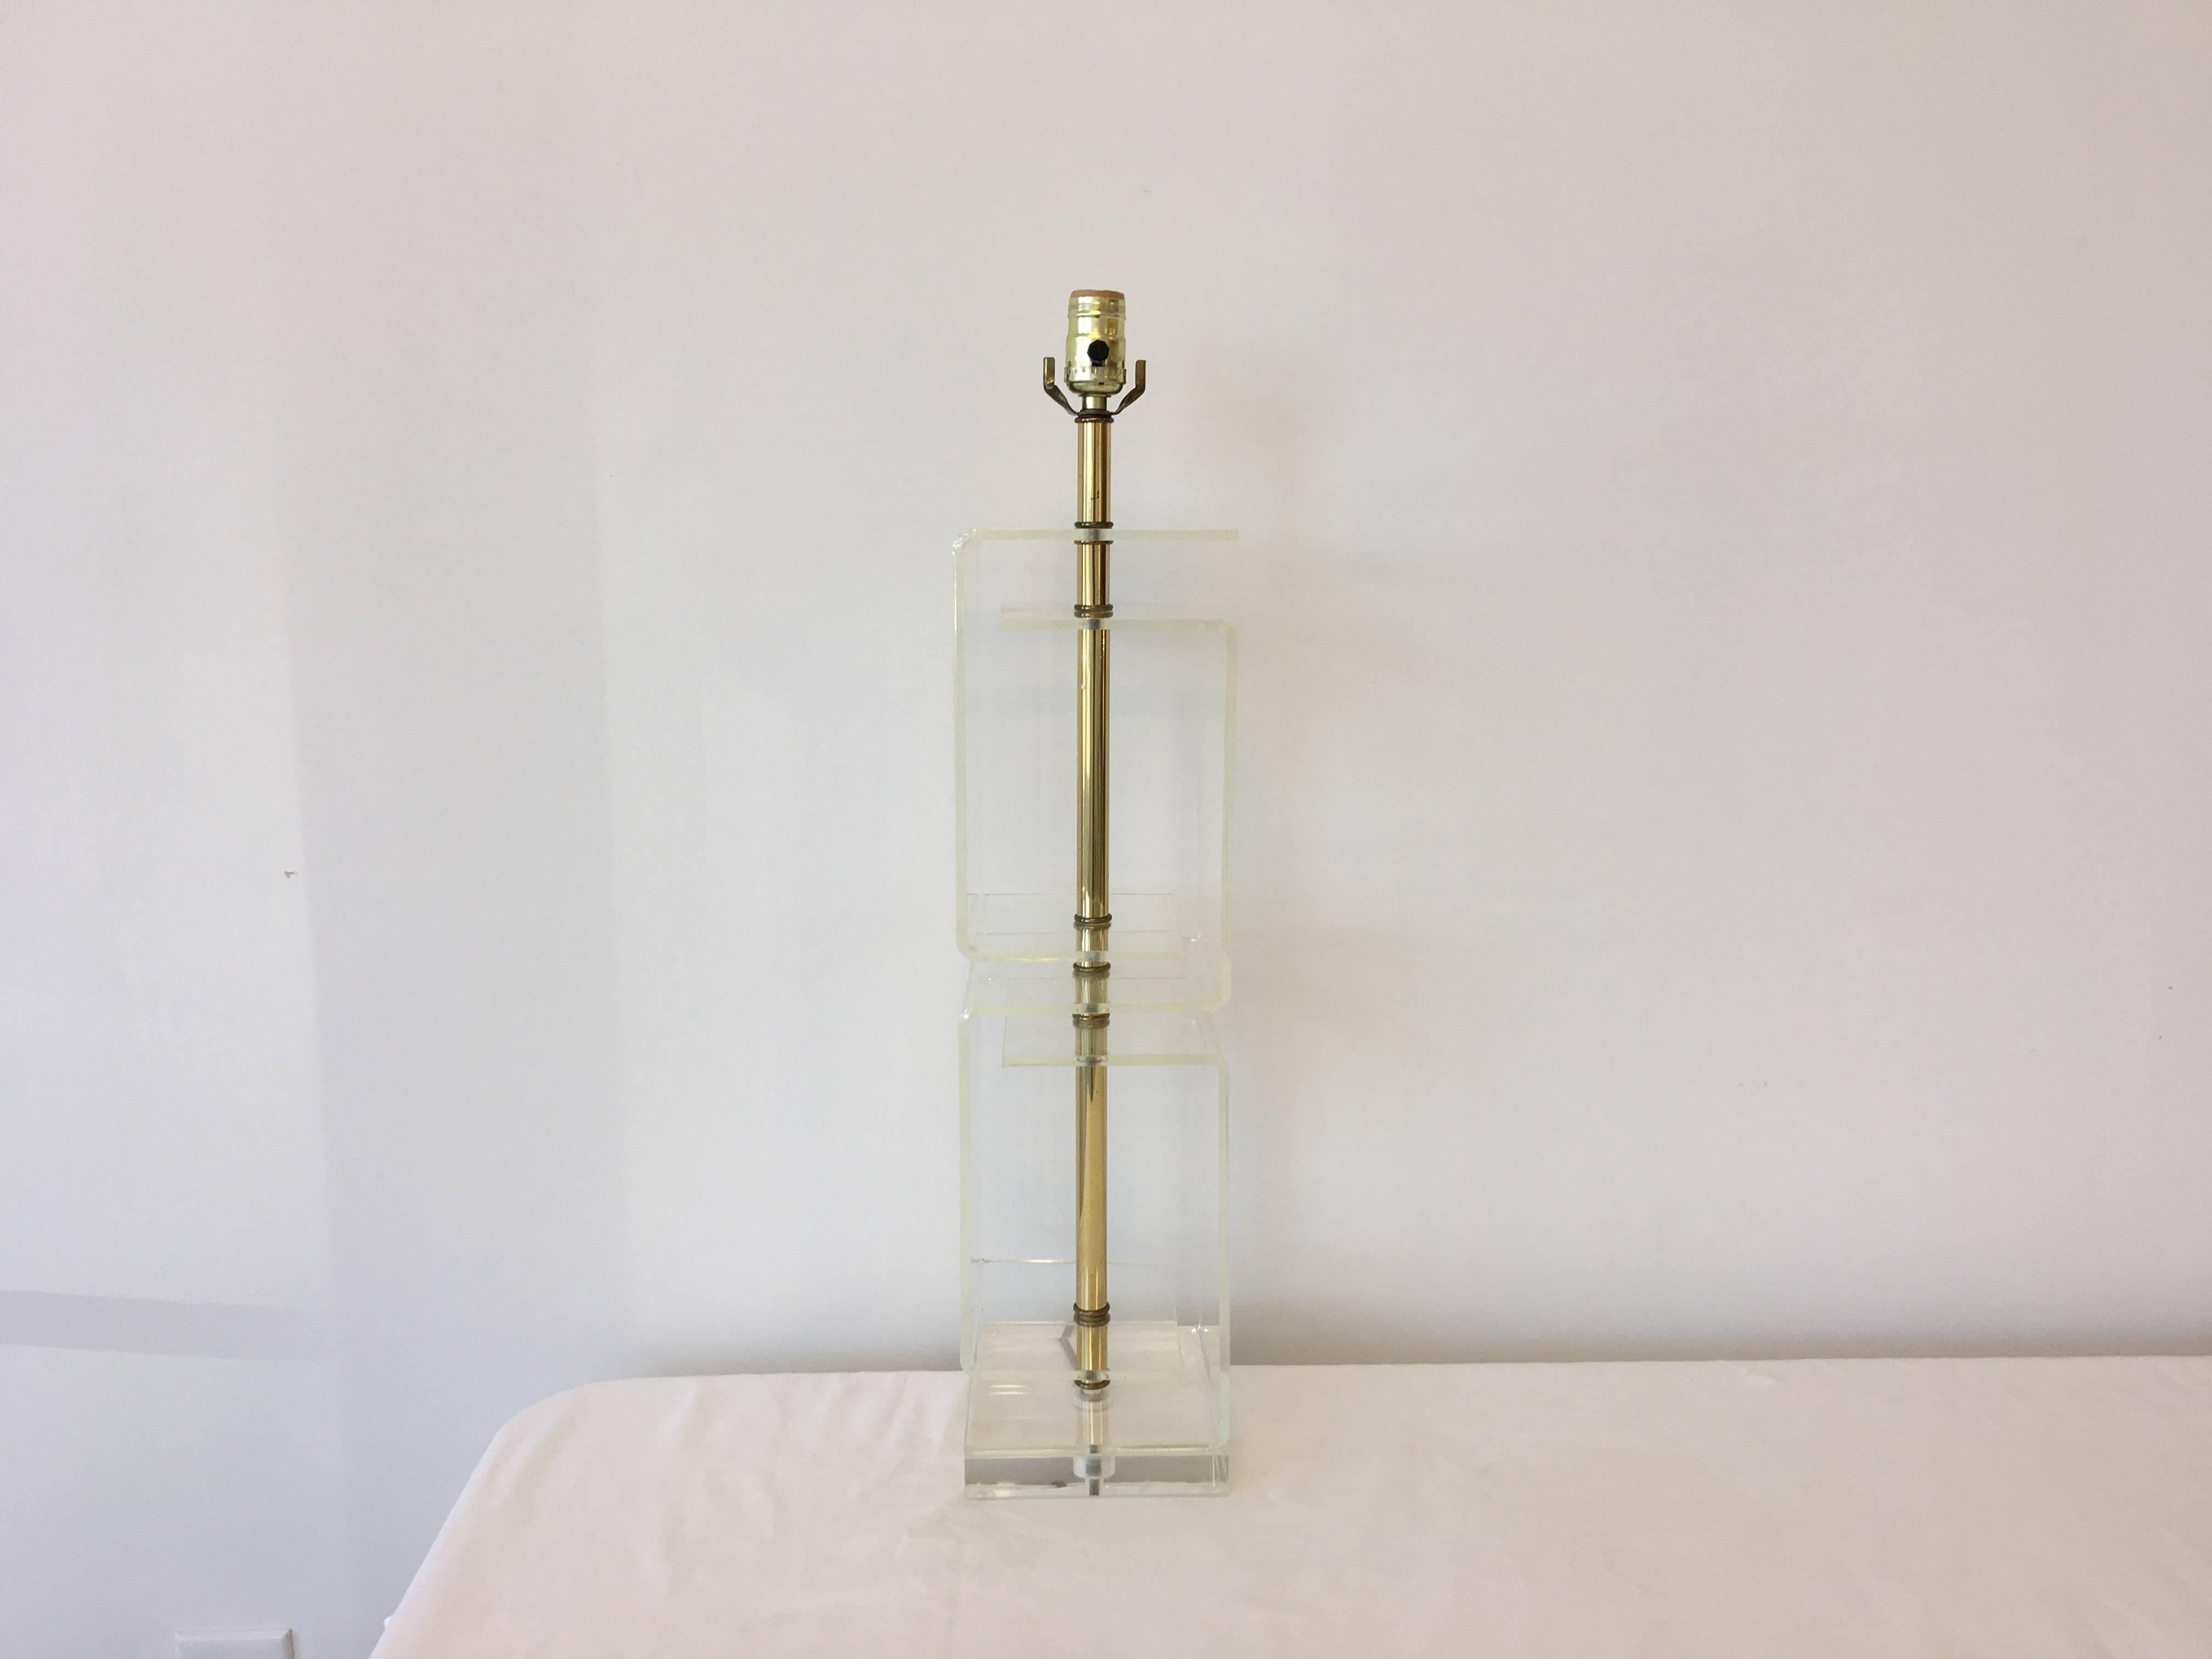 Offered is a stunning, 1960s Mid-Century Modern, Lucite table lamp. The piece features brass accents and a large, Greek key pattern Silhouette (the four cubes stacking).